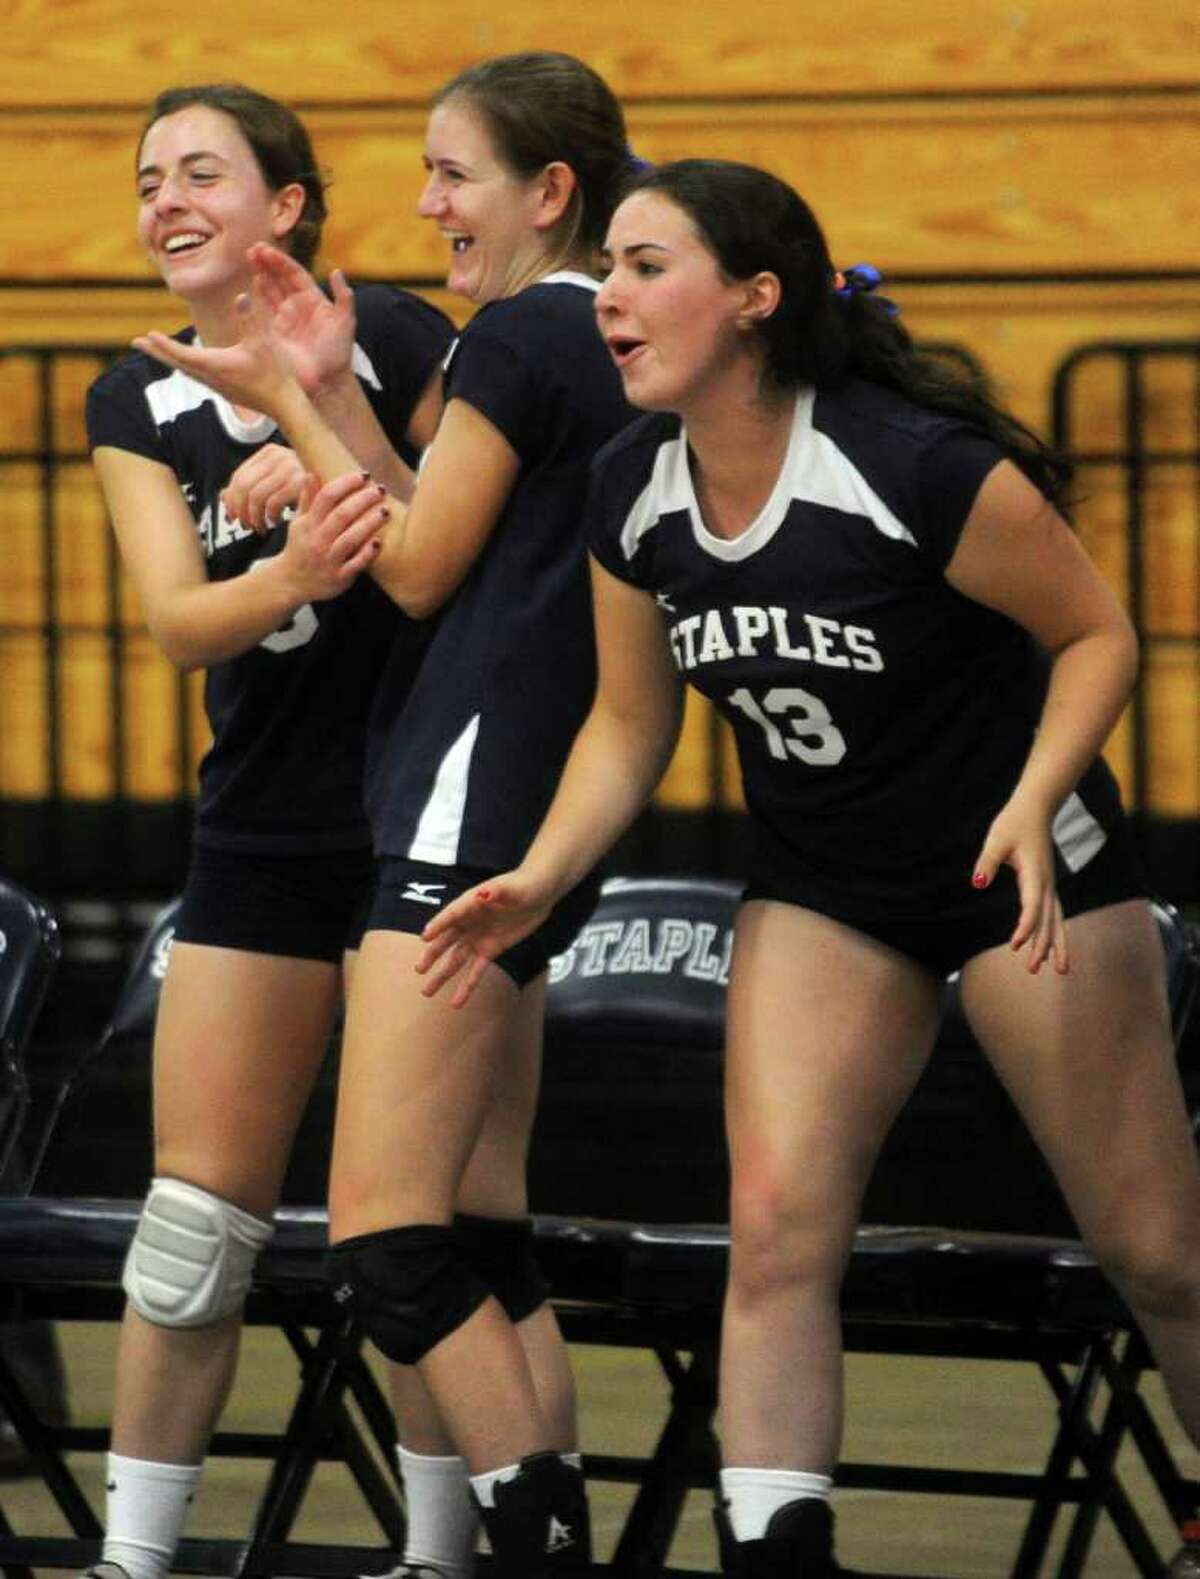 From left, Staples' Kristen Weiler, Melissa Sweeney and Audrey Stone cheer for their team during Wednesday's game against Darien at Staples High School on September 29, 2010.